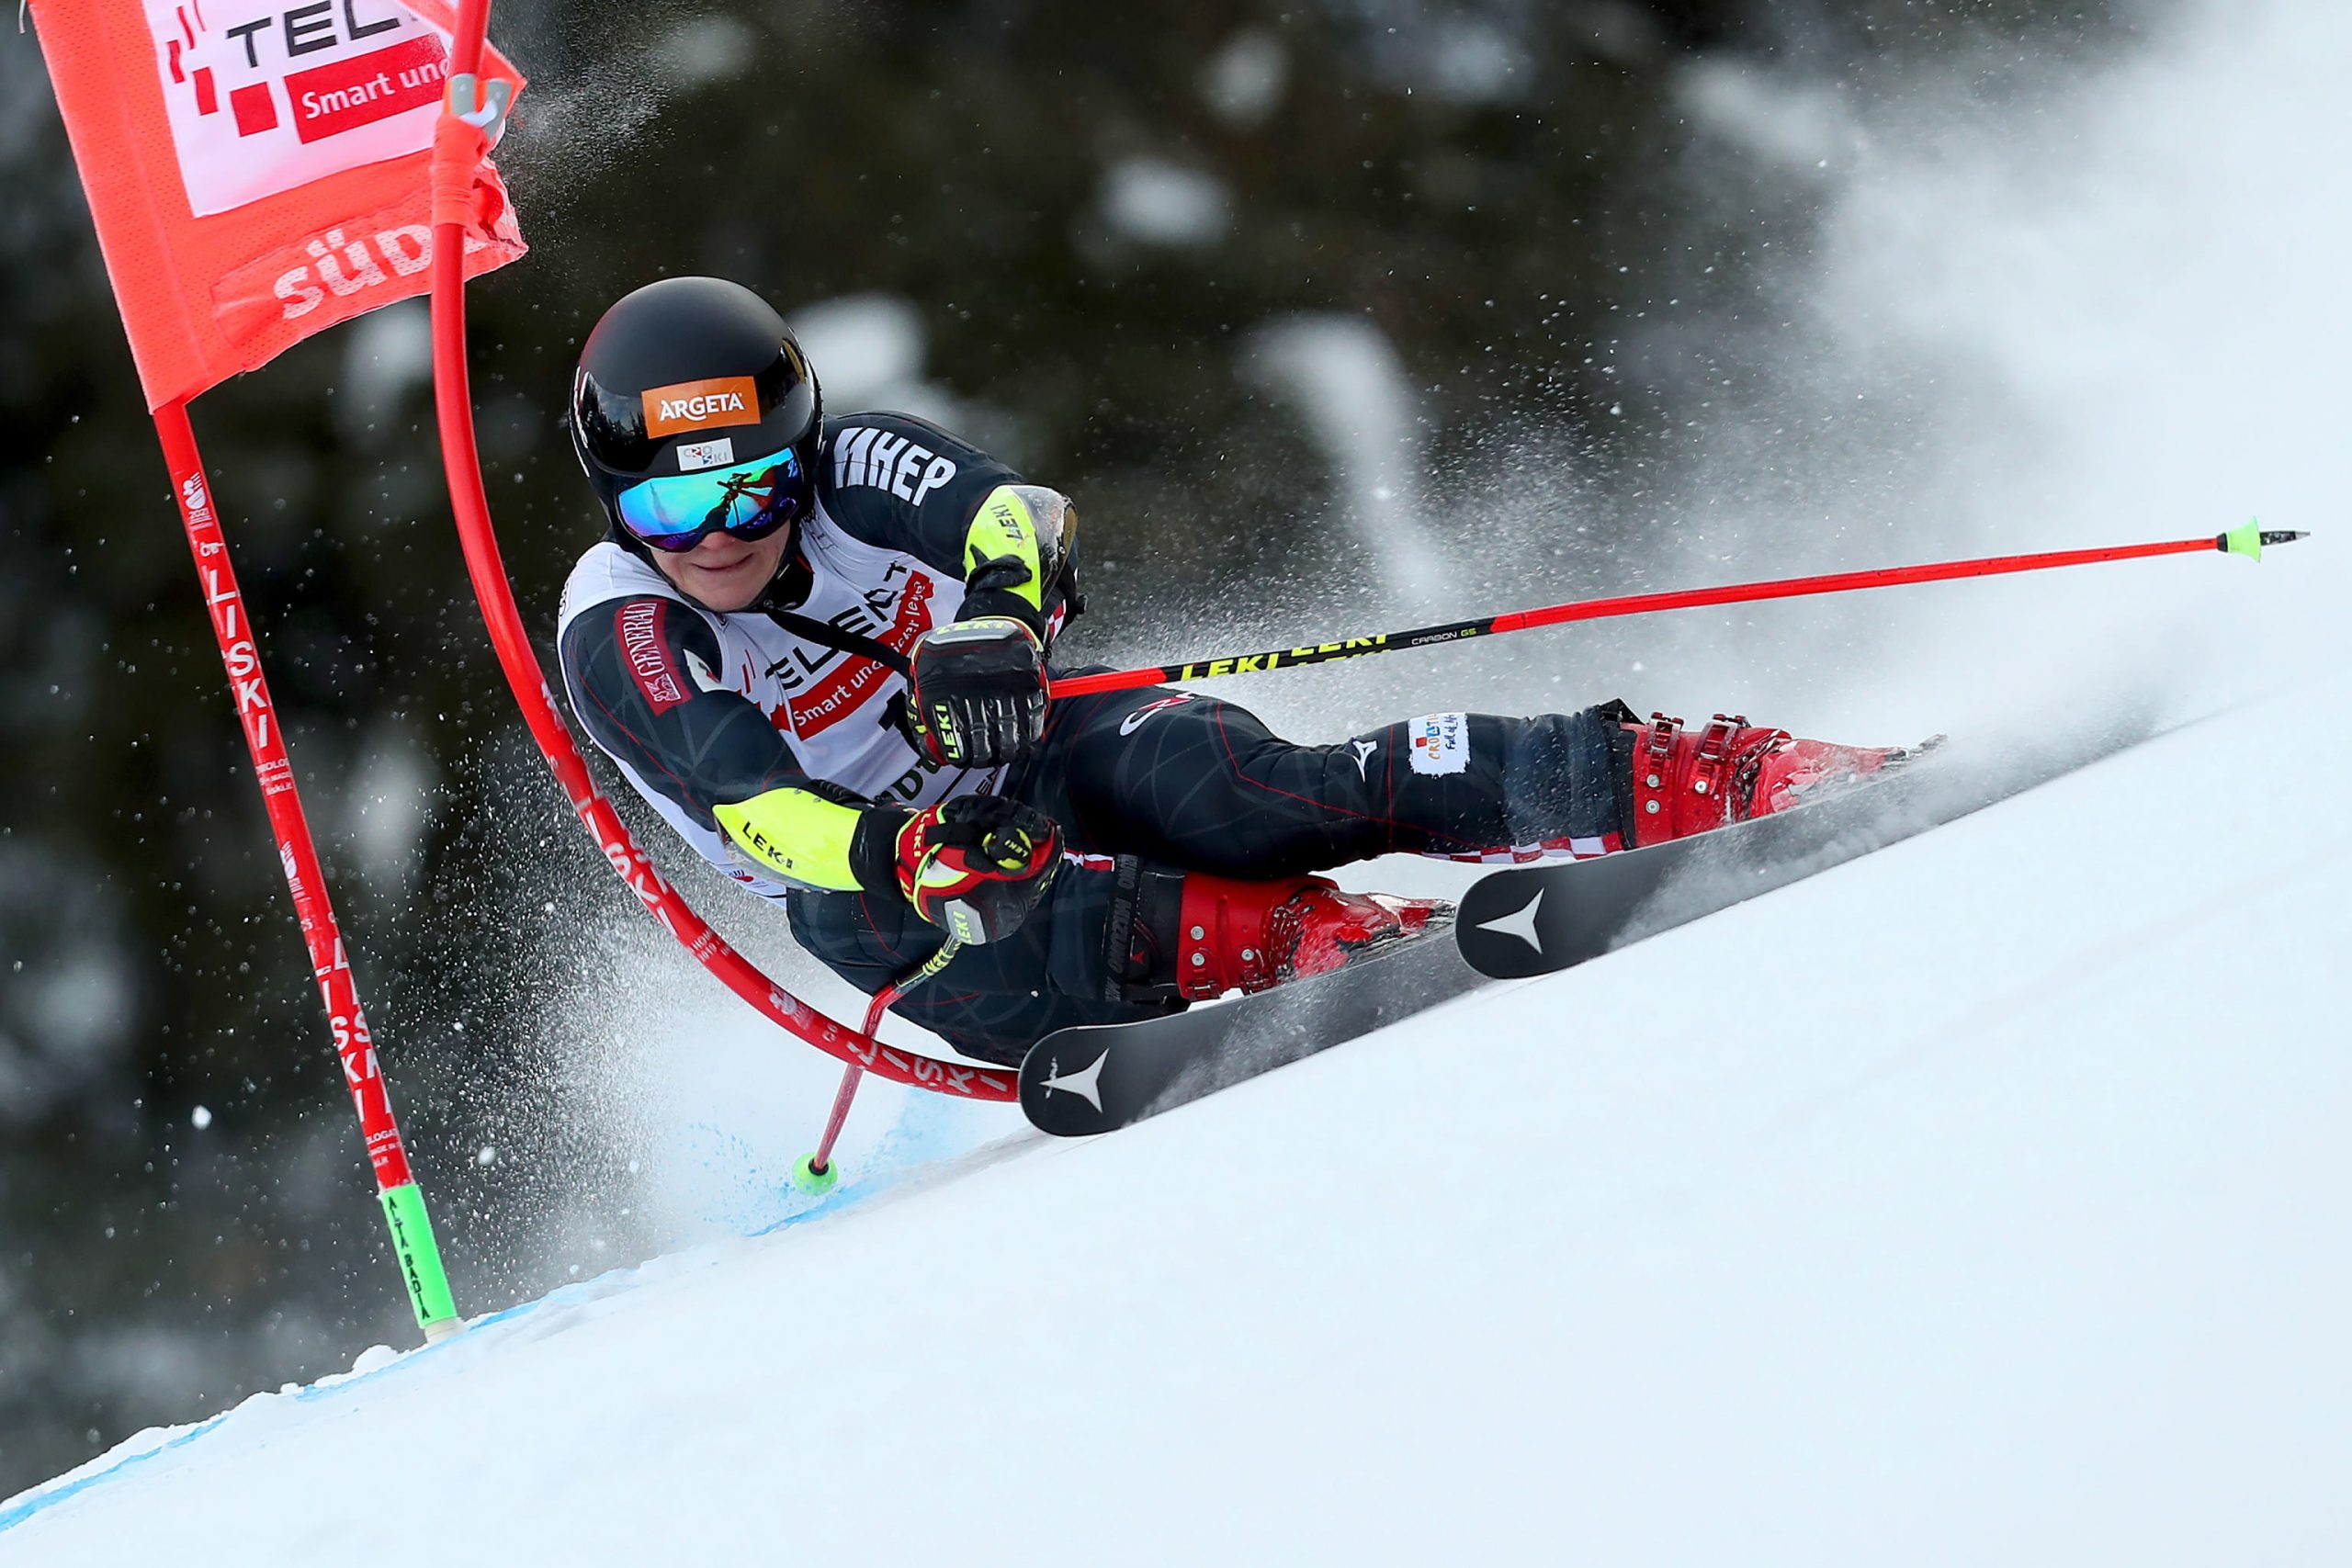 epa08895301 Filip Zubcic of Croatia clears a gate during the first run of the Men's Giant Slalom race at the Alpine Skiing World Cup in Alta Badia, Italy, 20 December 2020.  EPA/ANDREA SOLERO